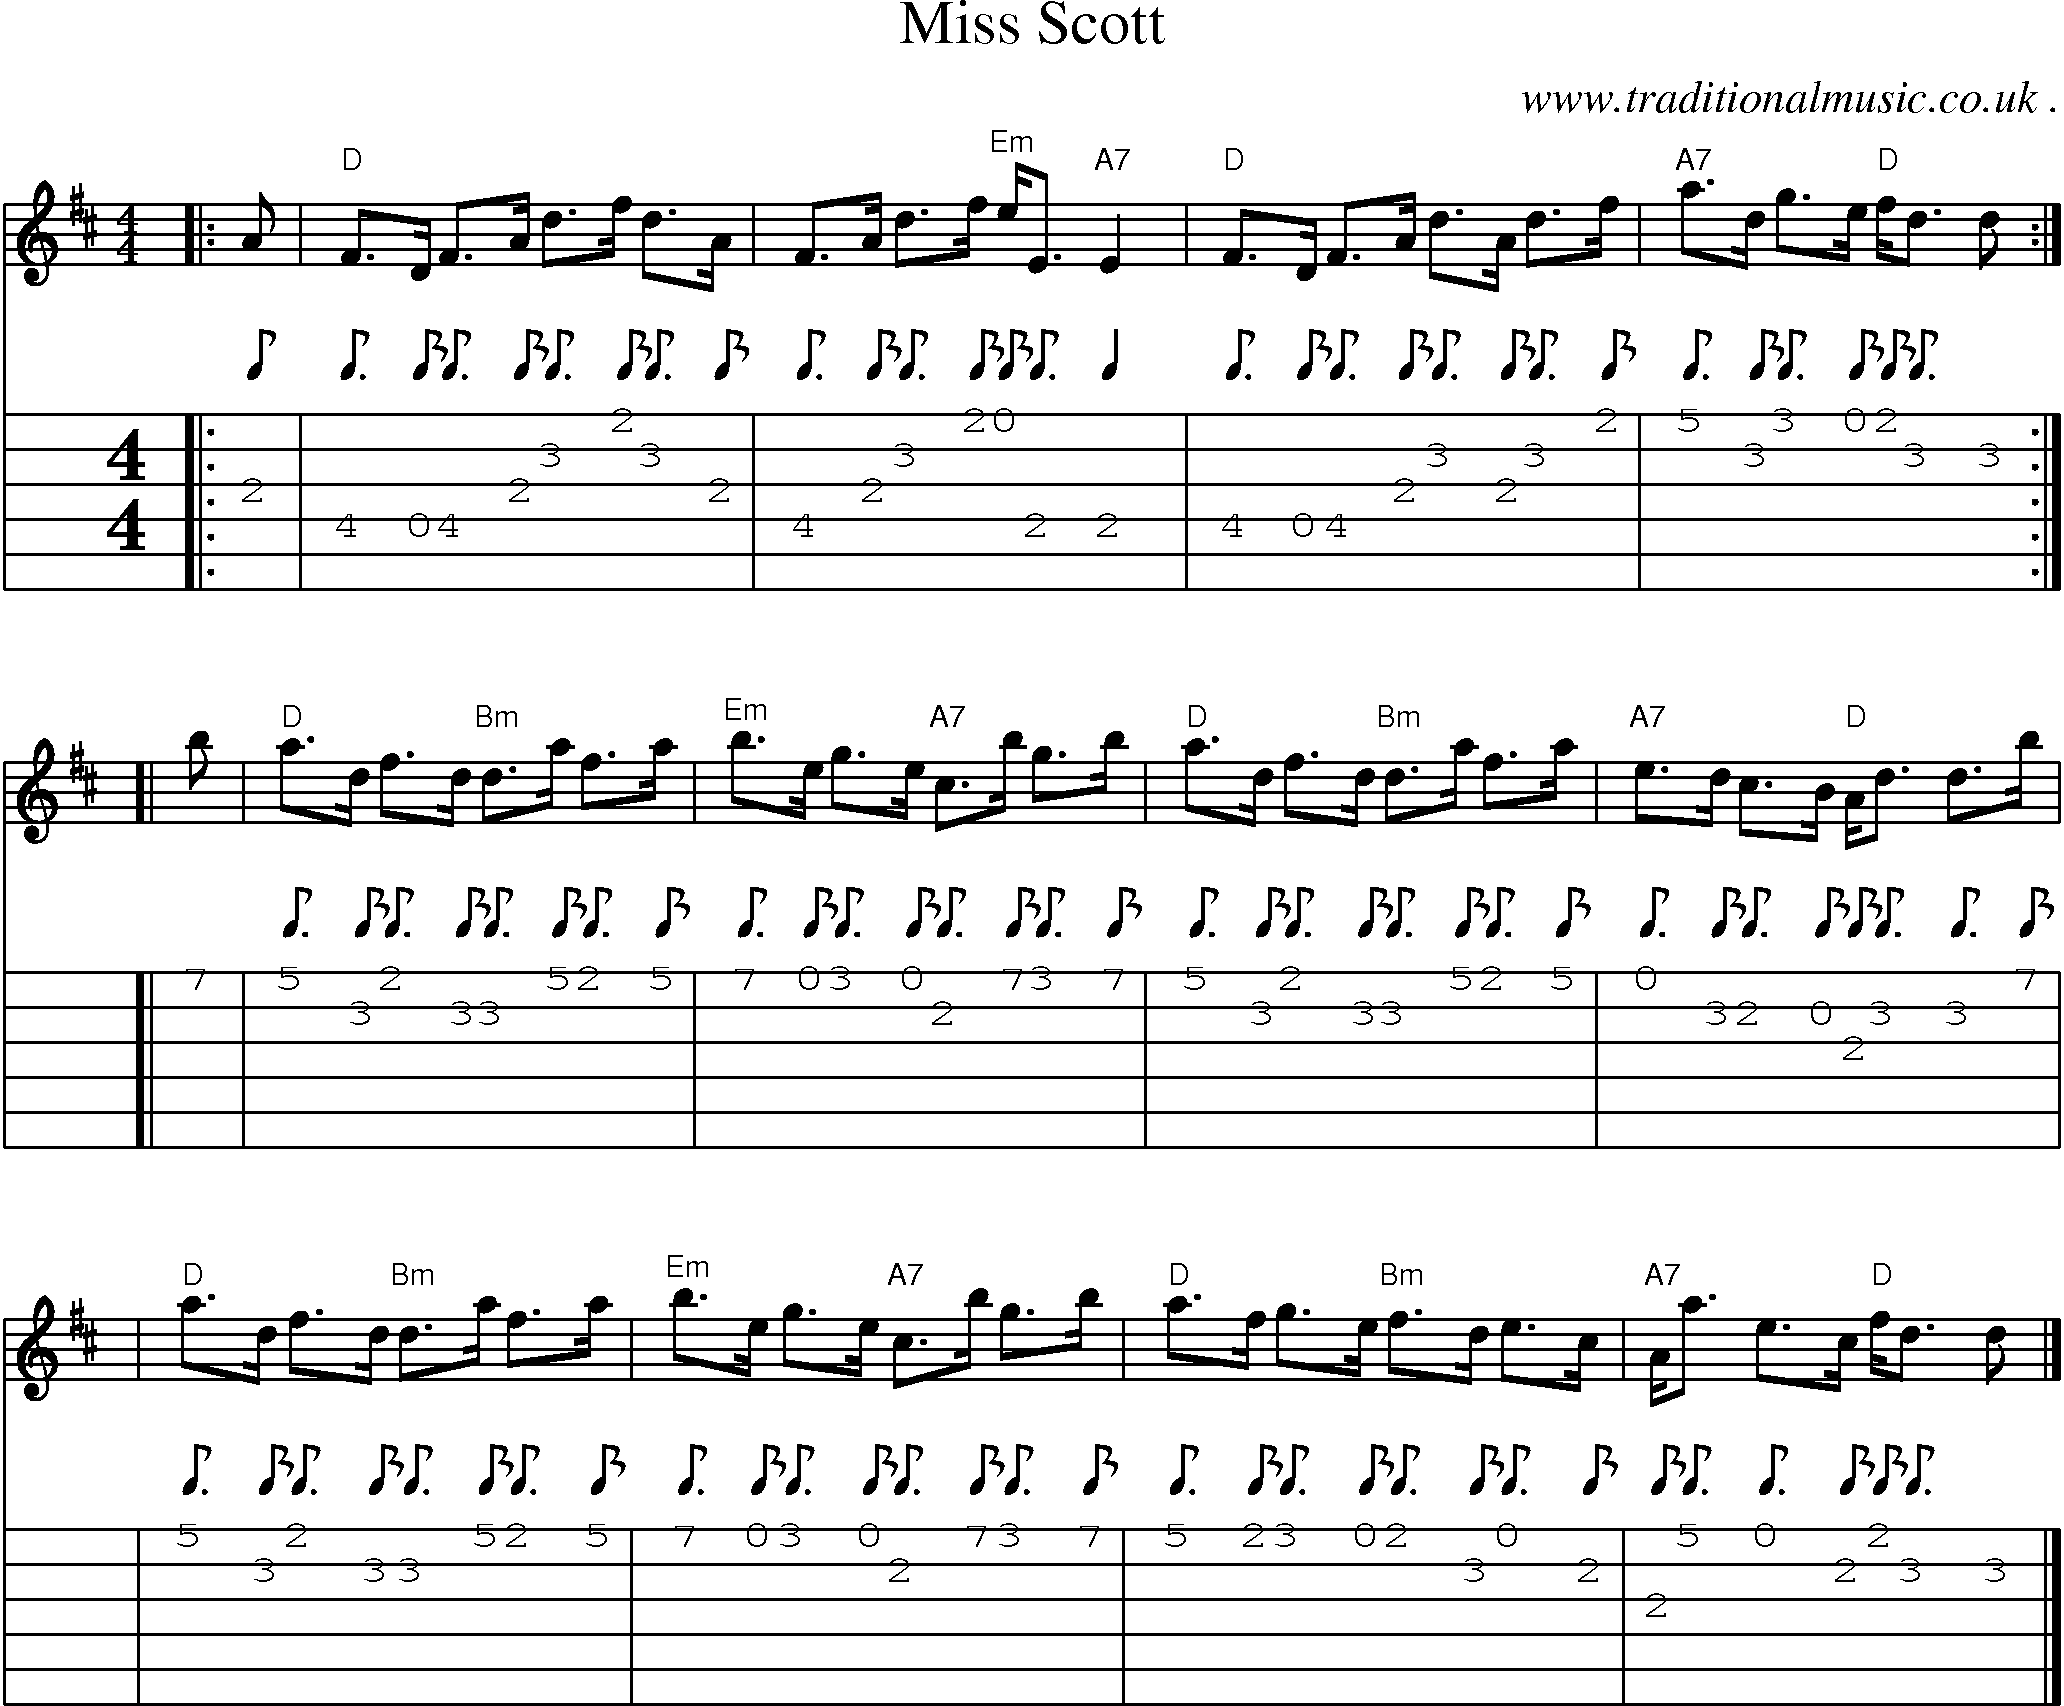 Sheet-music  score, Chords and Guitar Tabs for Miss Scott